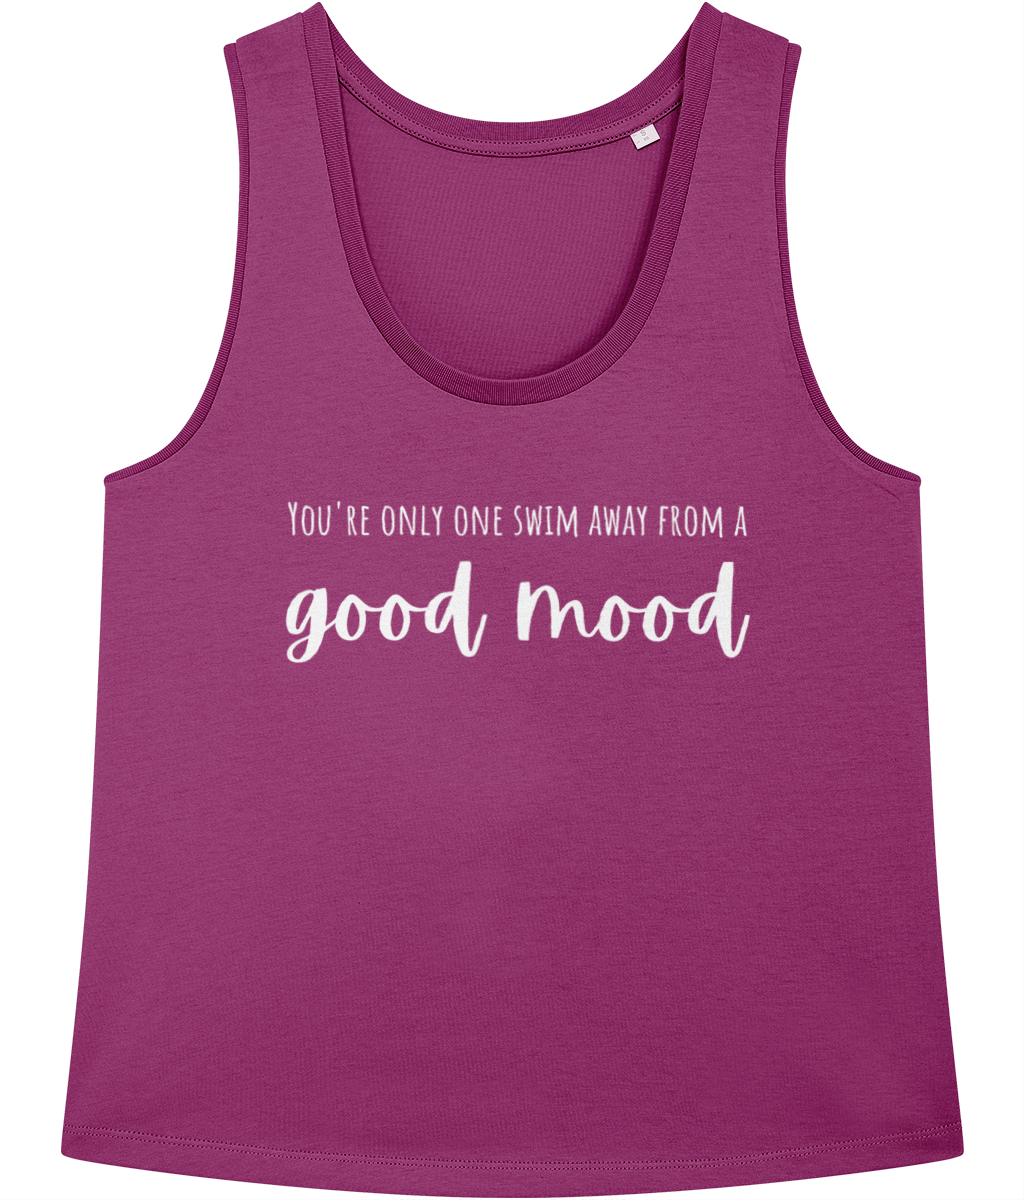 You're Only One Swim Away From A Good Mood 100% Organic Cotton Vest Top